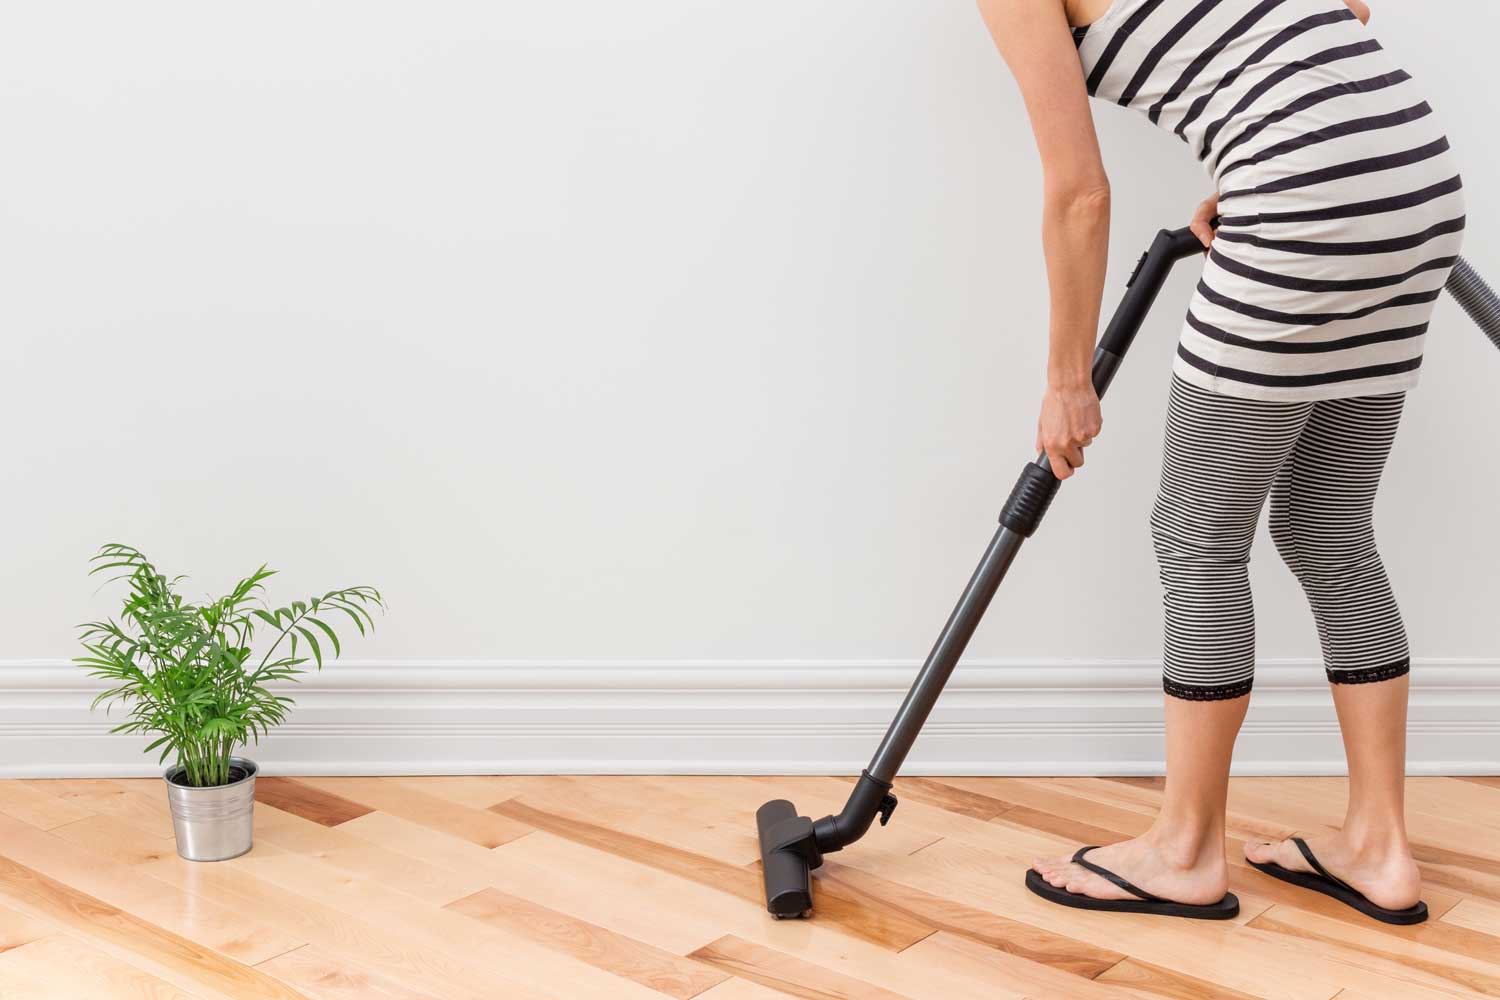 Regulary vacuum or sweep floors to remove dirt and keep your home floors looking amazing - tips from Footprints Floors in Madison.